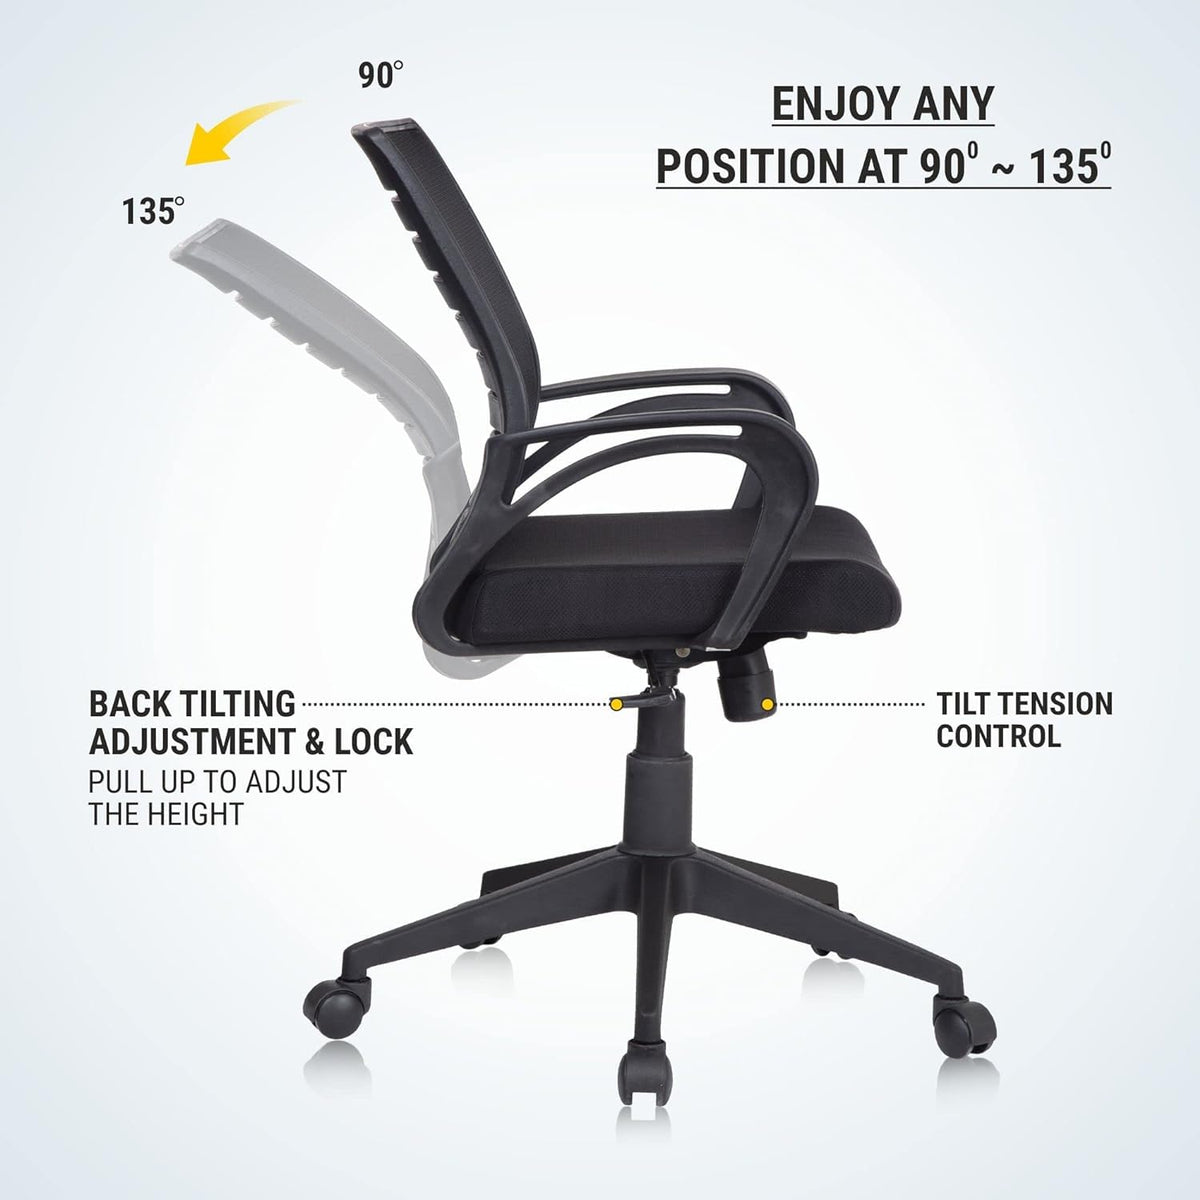 SmileSellers Boom Mesh Mid-Back Ergonomic Desk Office Chair with Tilting Mechanism, Comfortable Seat, and Revolving Heavy Duty Metal Base | Ideal for Work from Home & Study